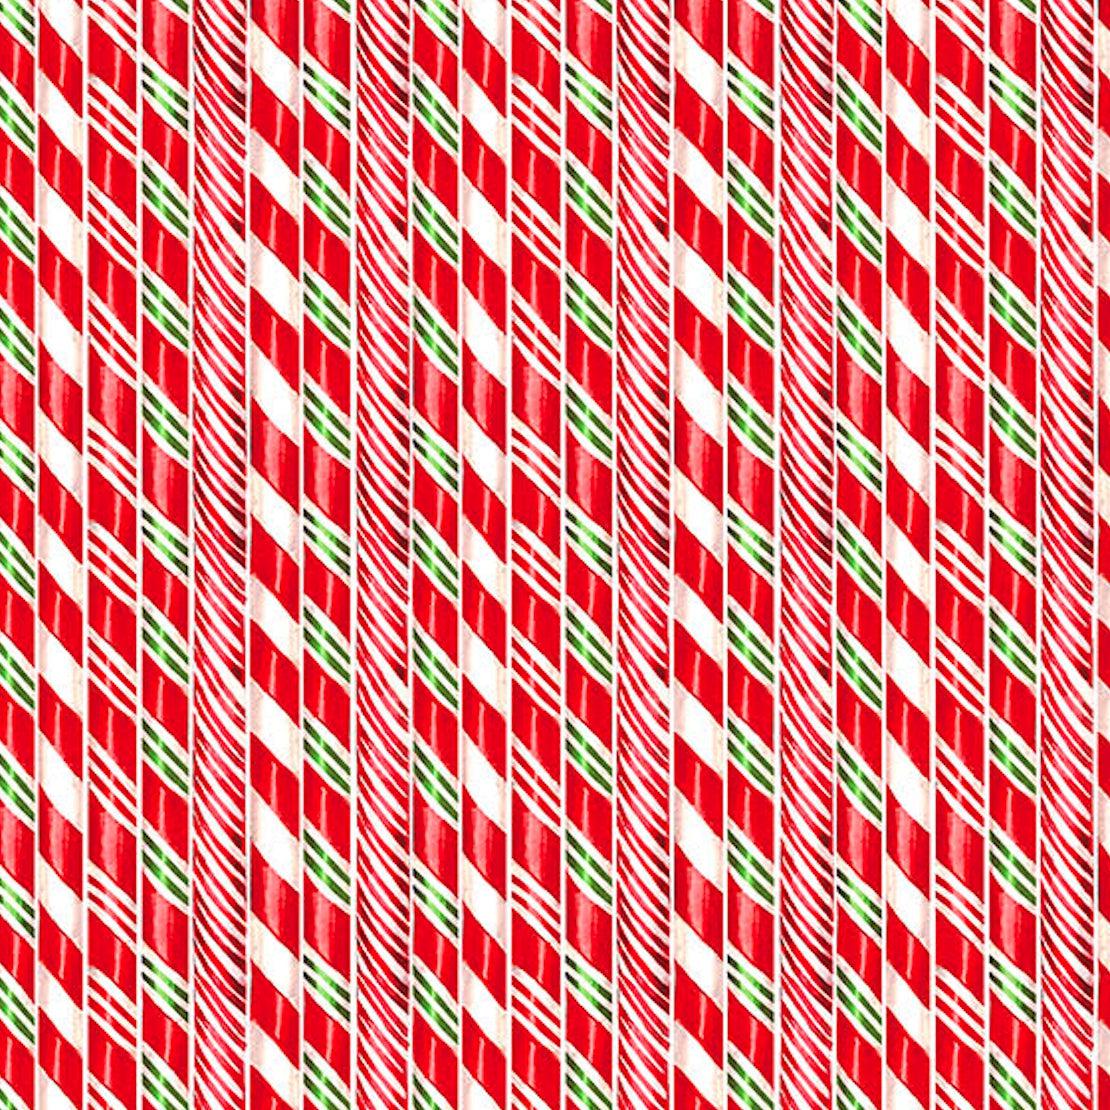 Sugarcoated Red and White Candy Cane Stripes Fabric